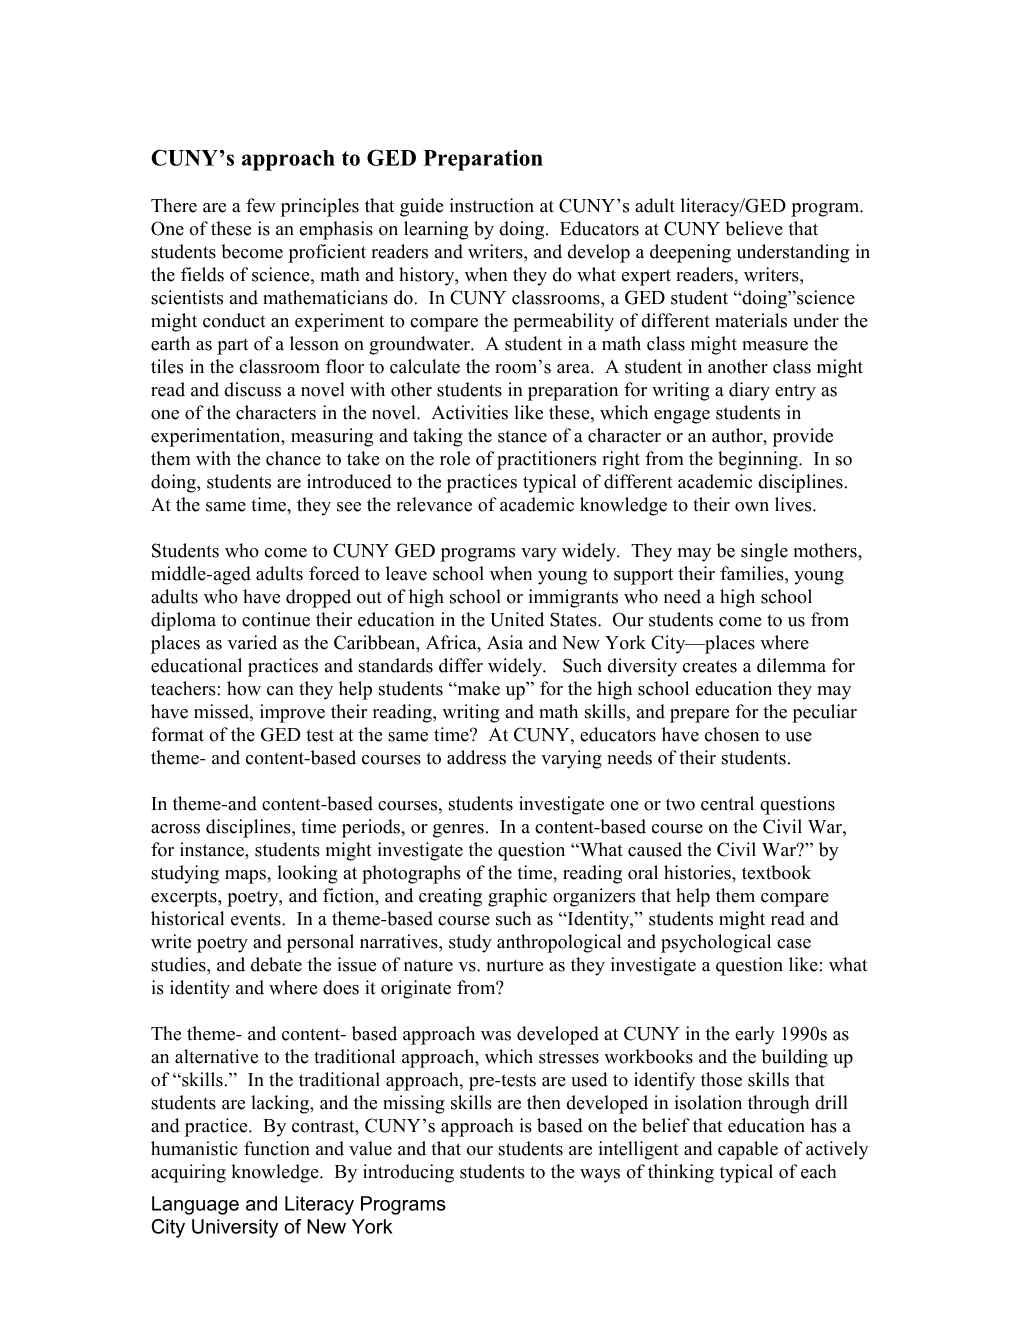 Draft of Piece on CUNY S Approach to the GED for the Website